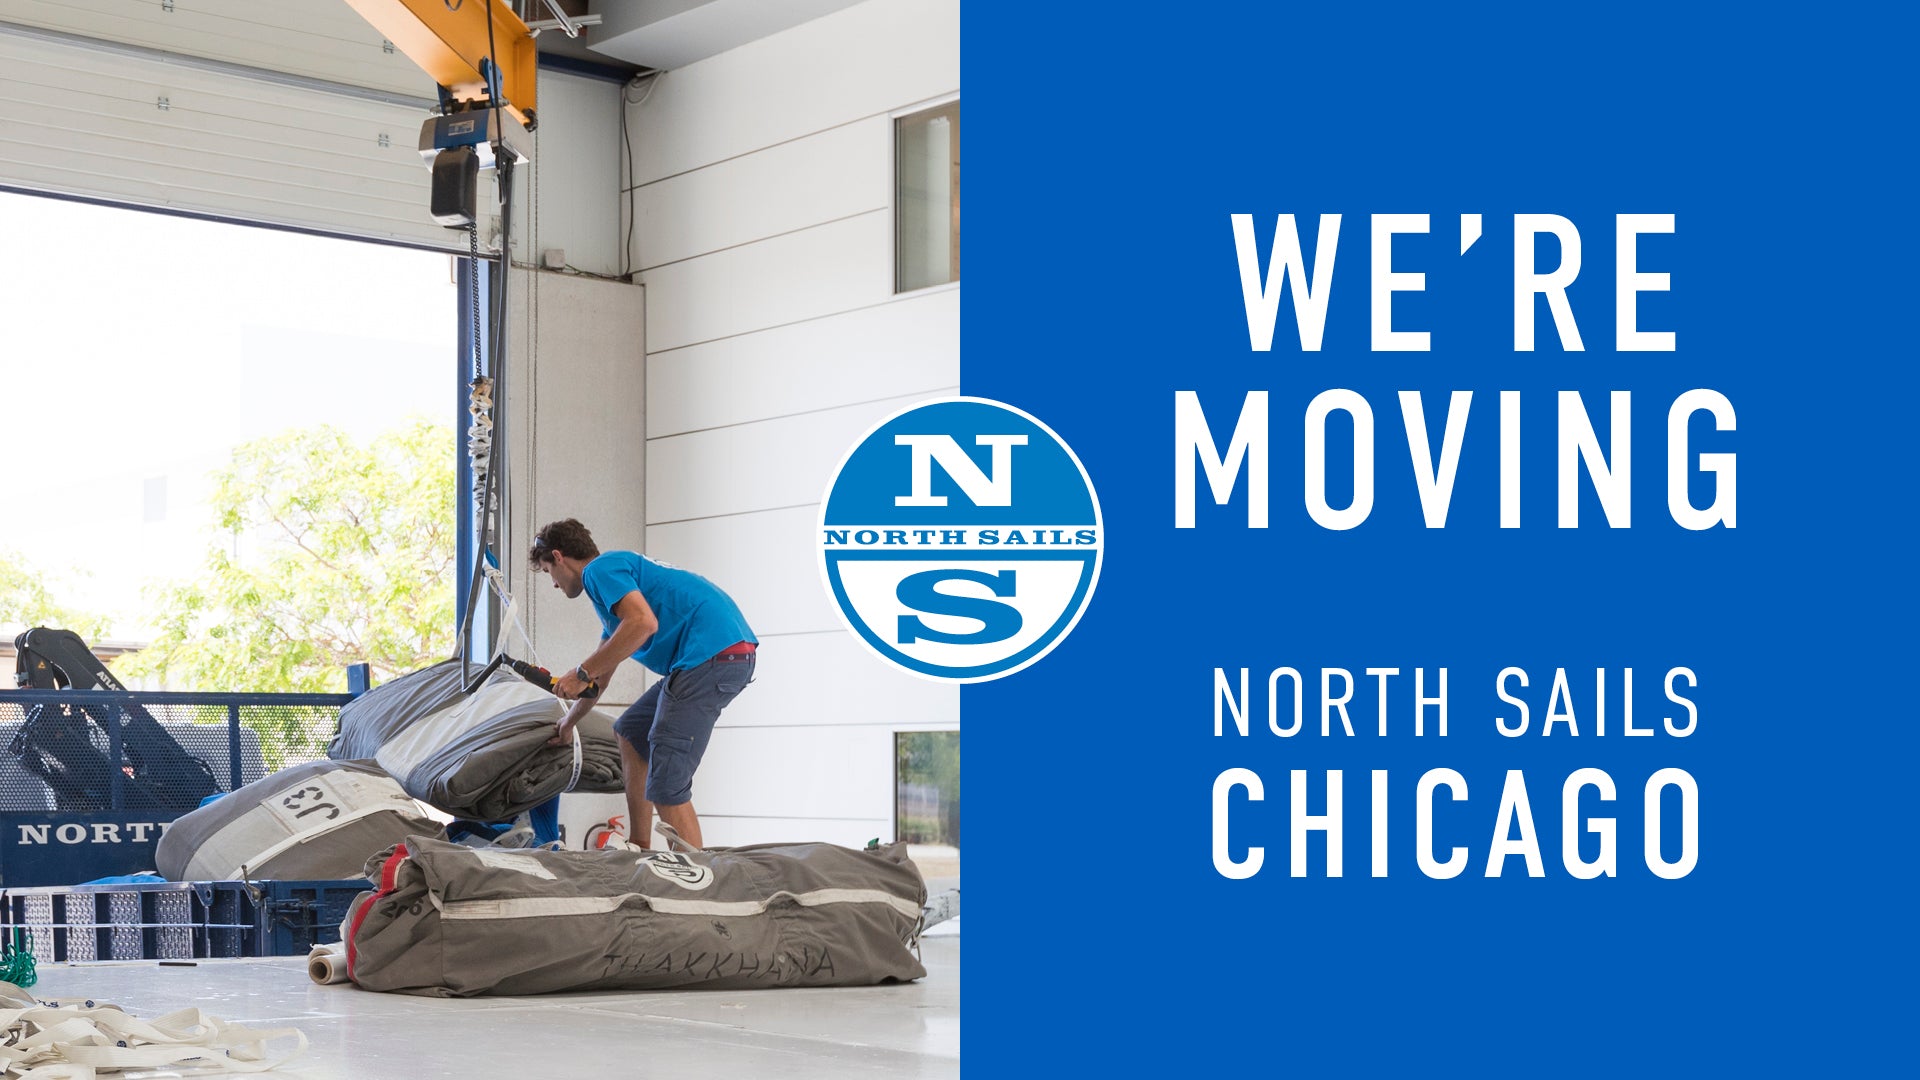 INTRODUCING THE NEW NORTH SAILS CHICAGO